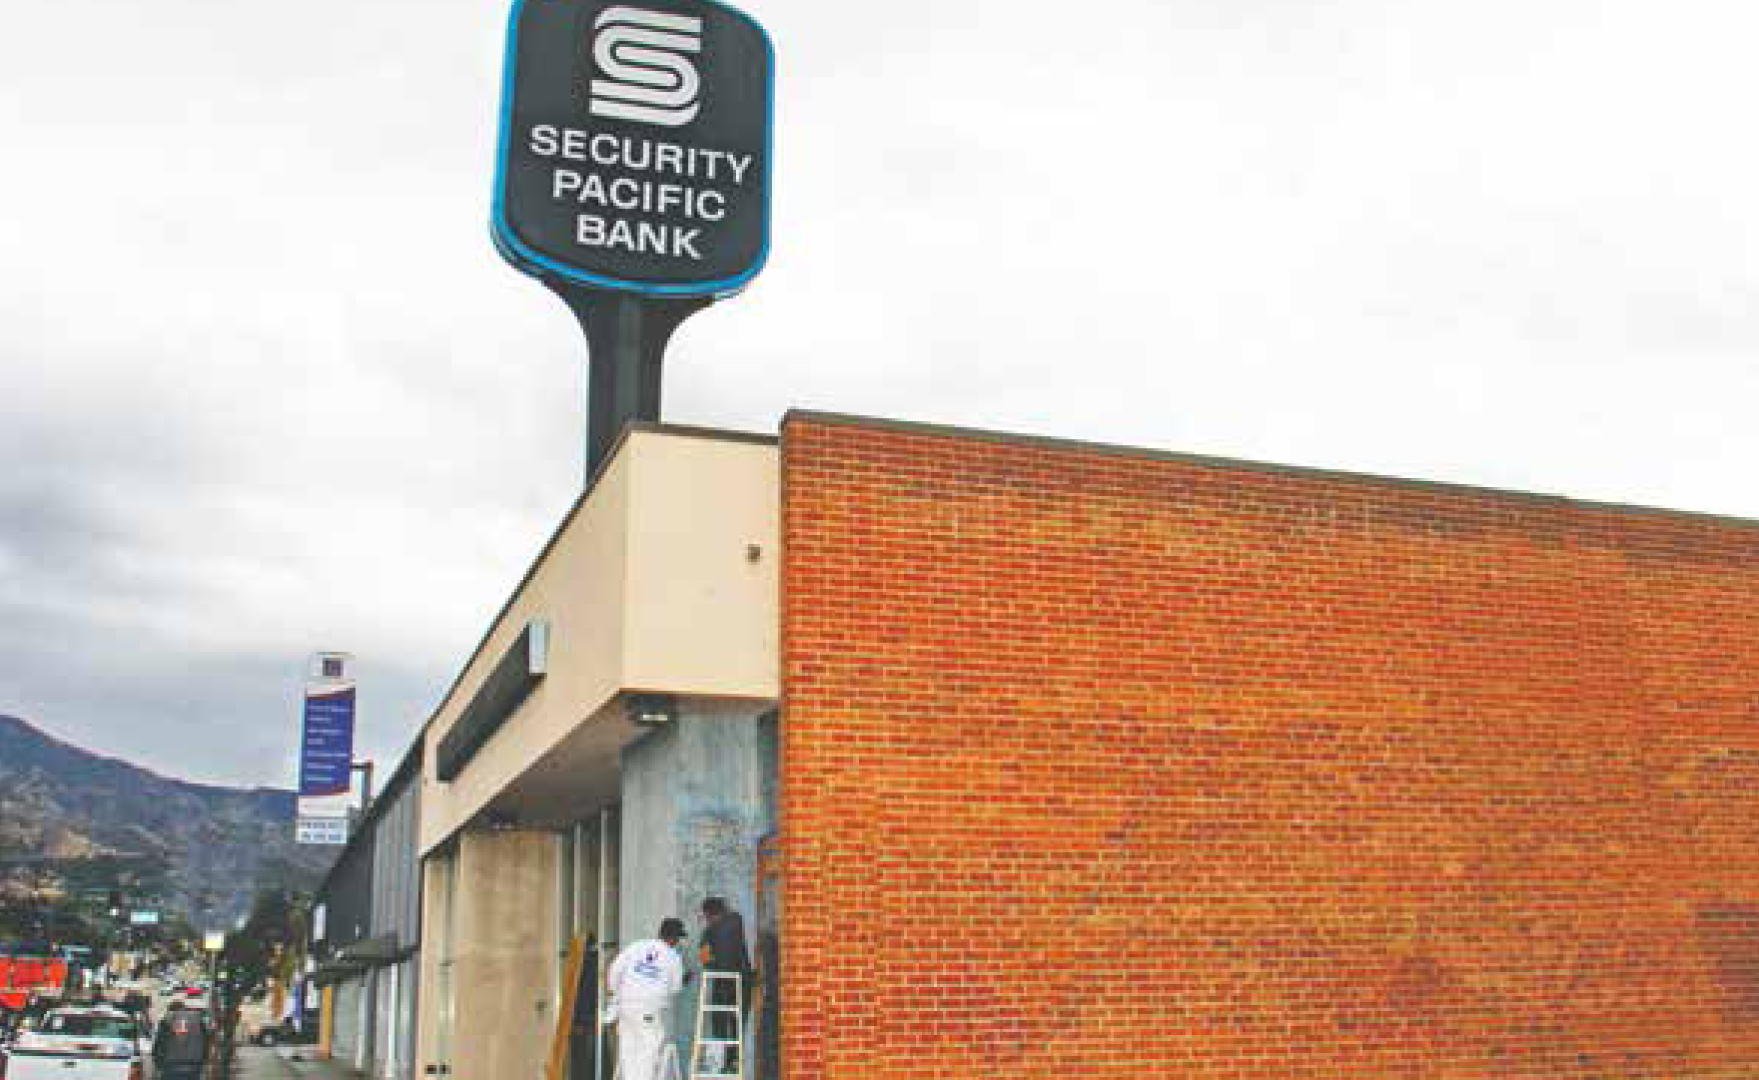 The “Old” Security Pacific Bank gets a face lif